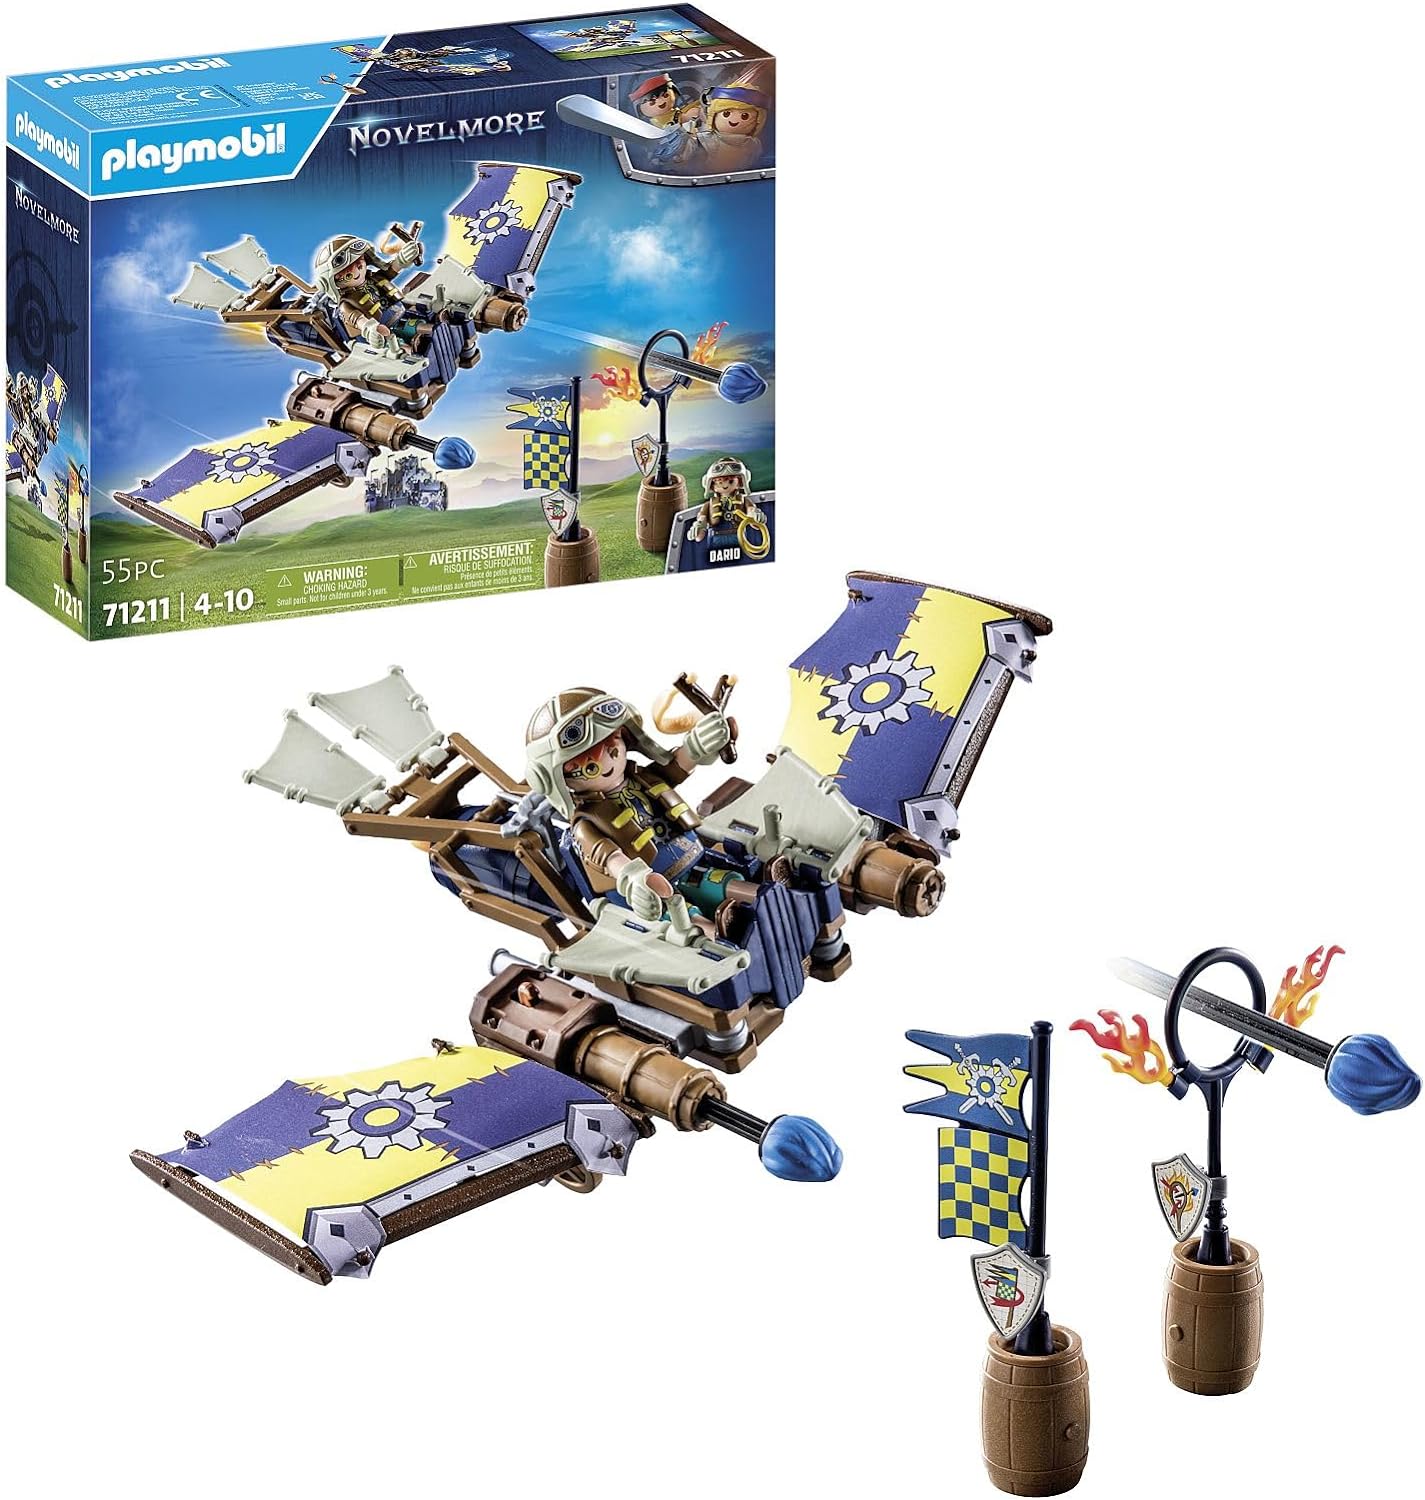 PLAYMOBIL Novelmore 71211 Novelmore Darios Flight Glider, Sky Glider with Bolt Cannons, Slingshot Seat and Exciting Accessories, Toy for Children from 4 Years